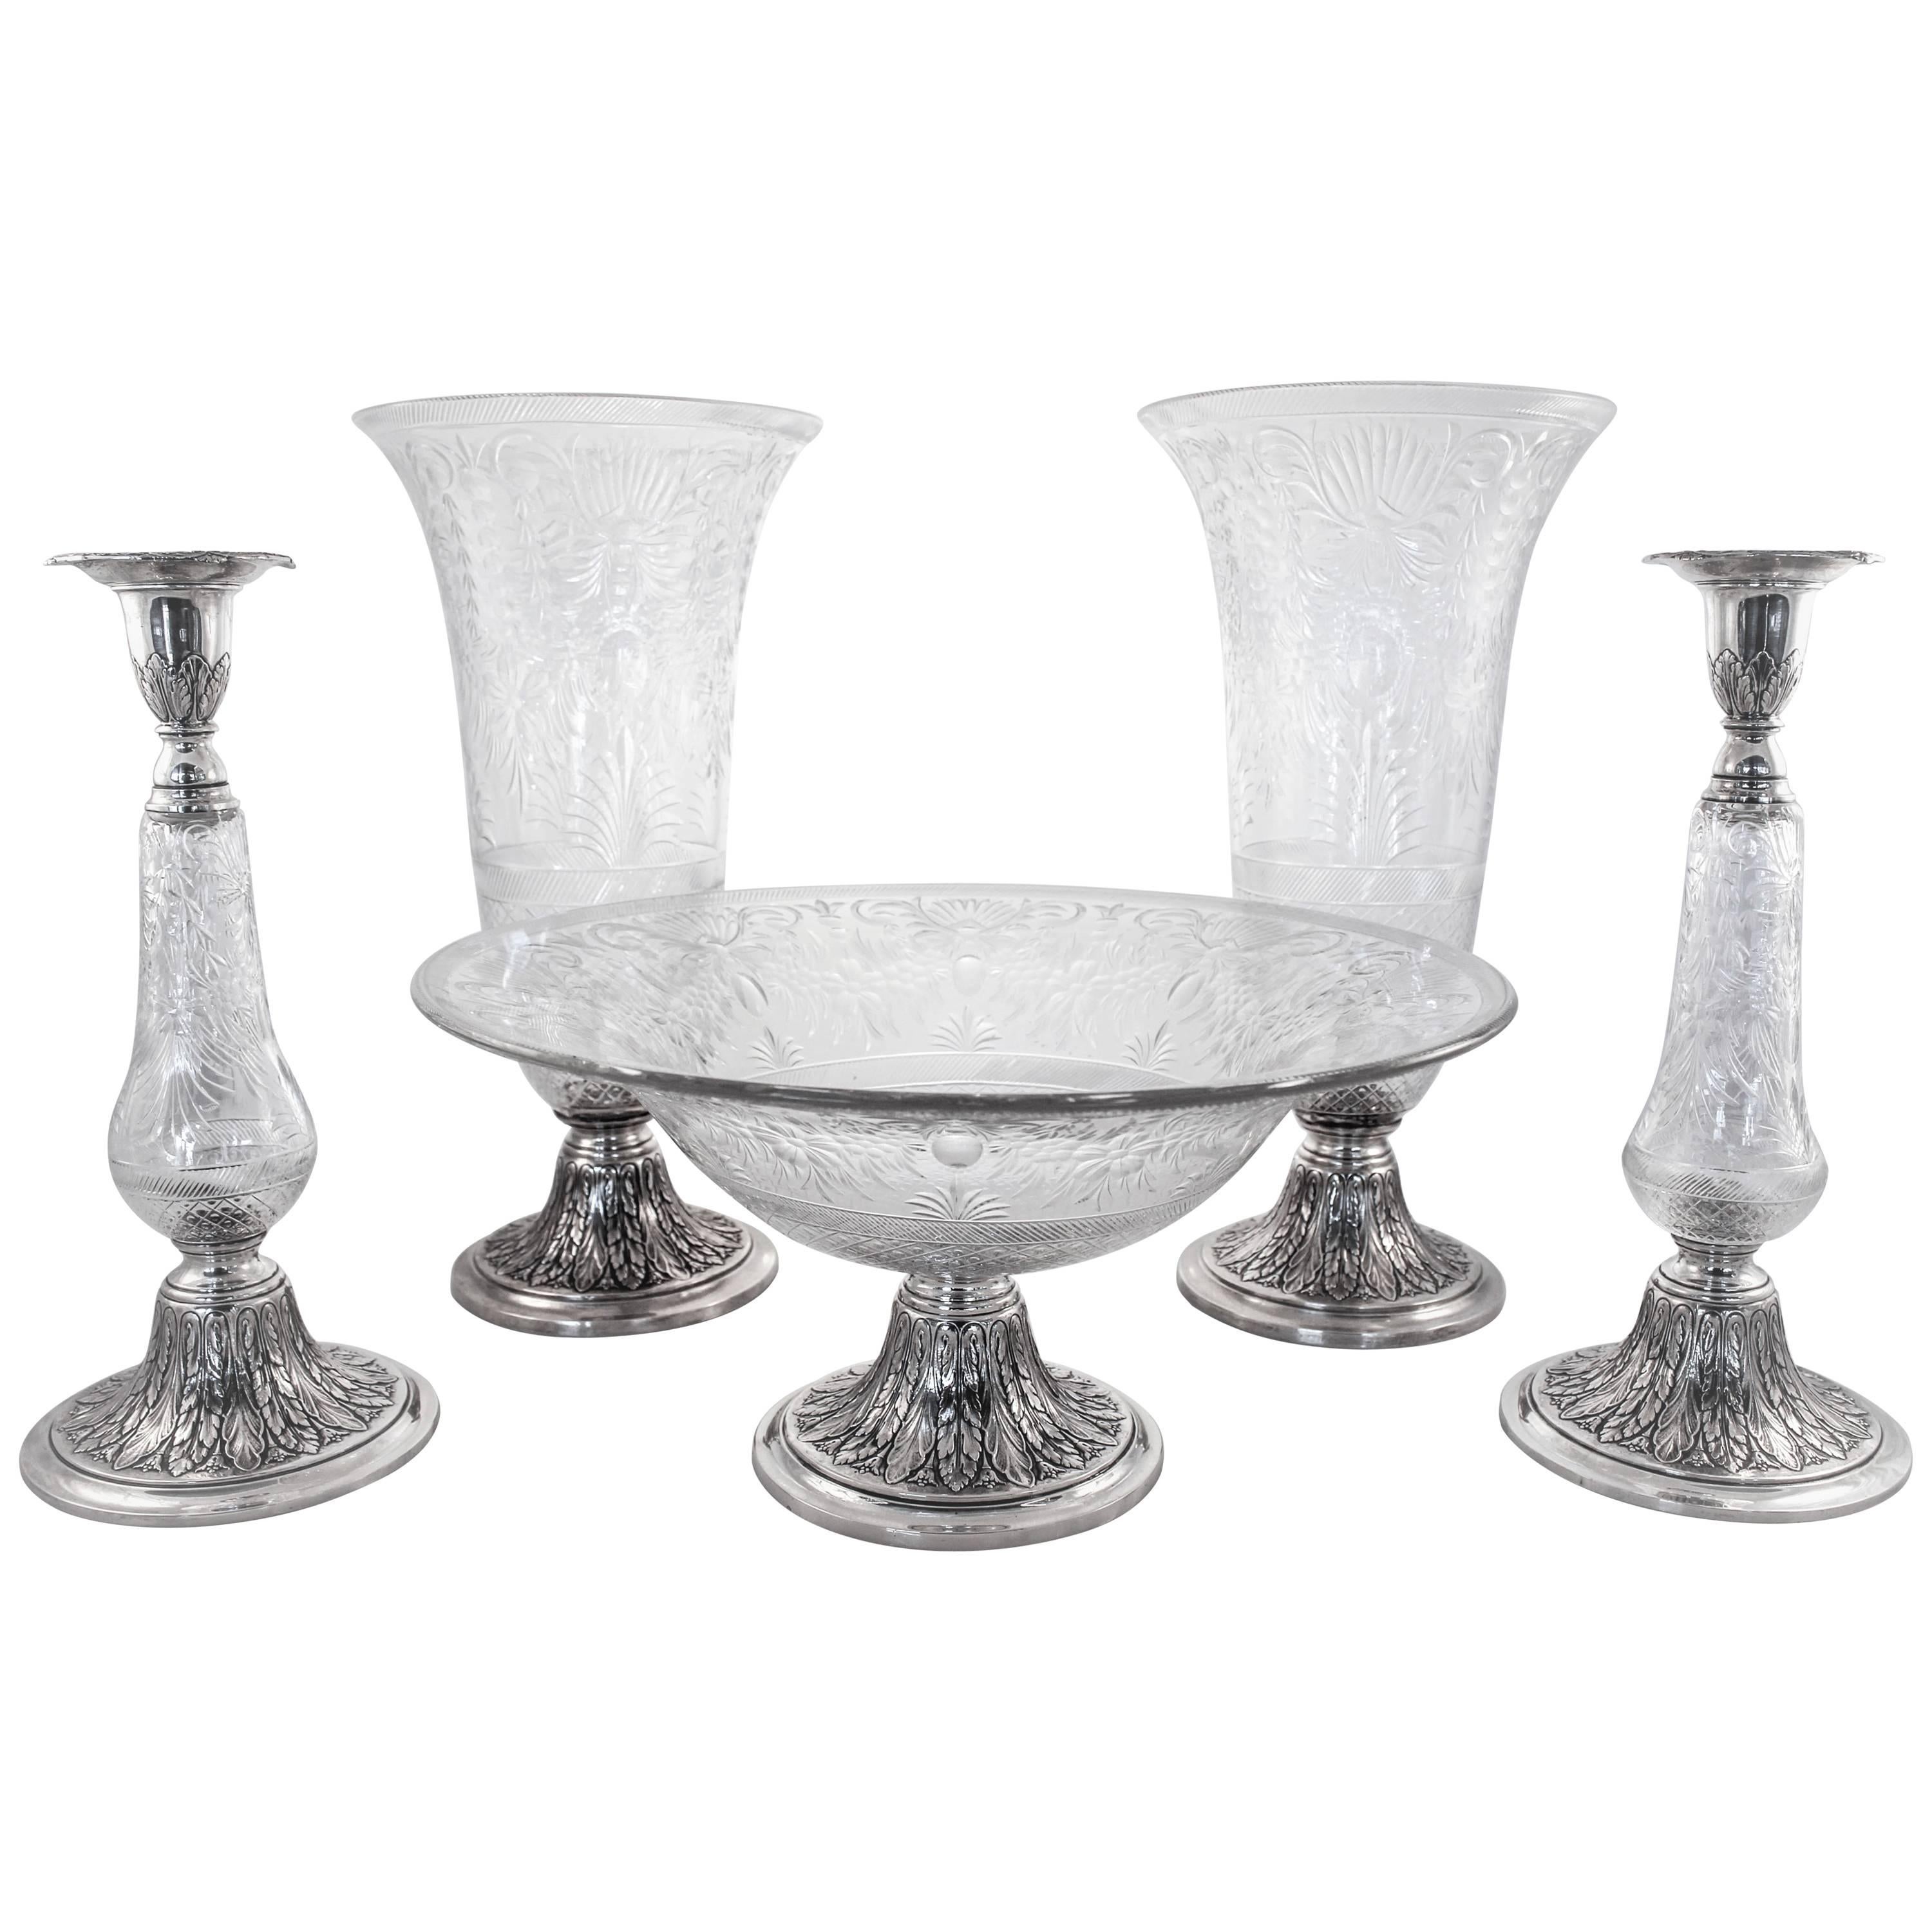 Five Piece Sterling and Crystal Suite